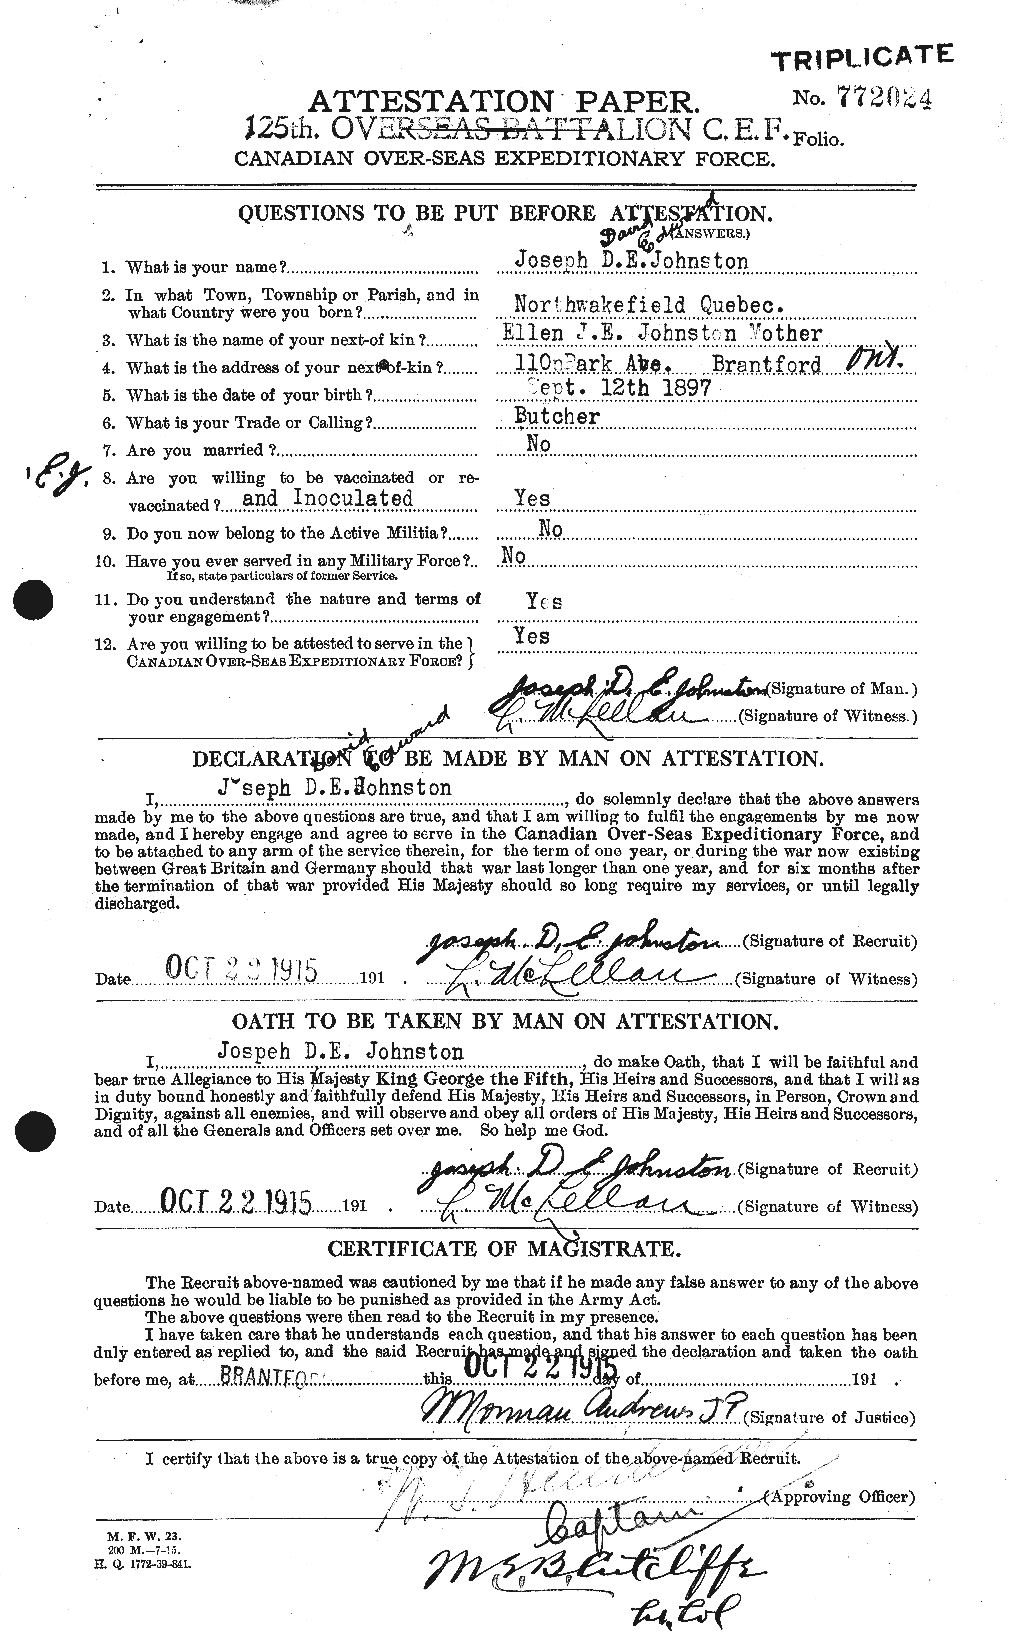 Personnel Records of the First World War - CEF 422905a